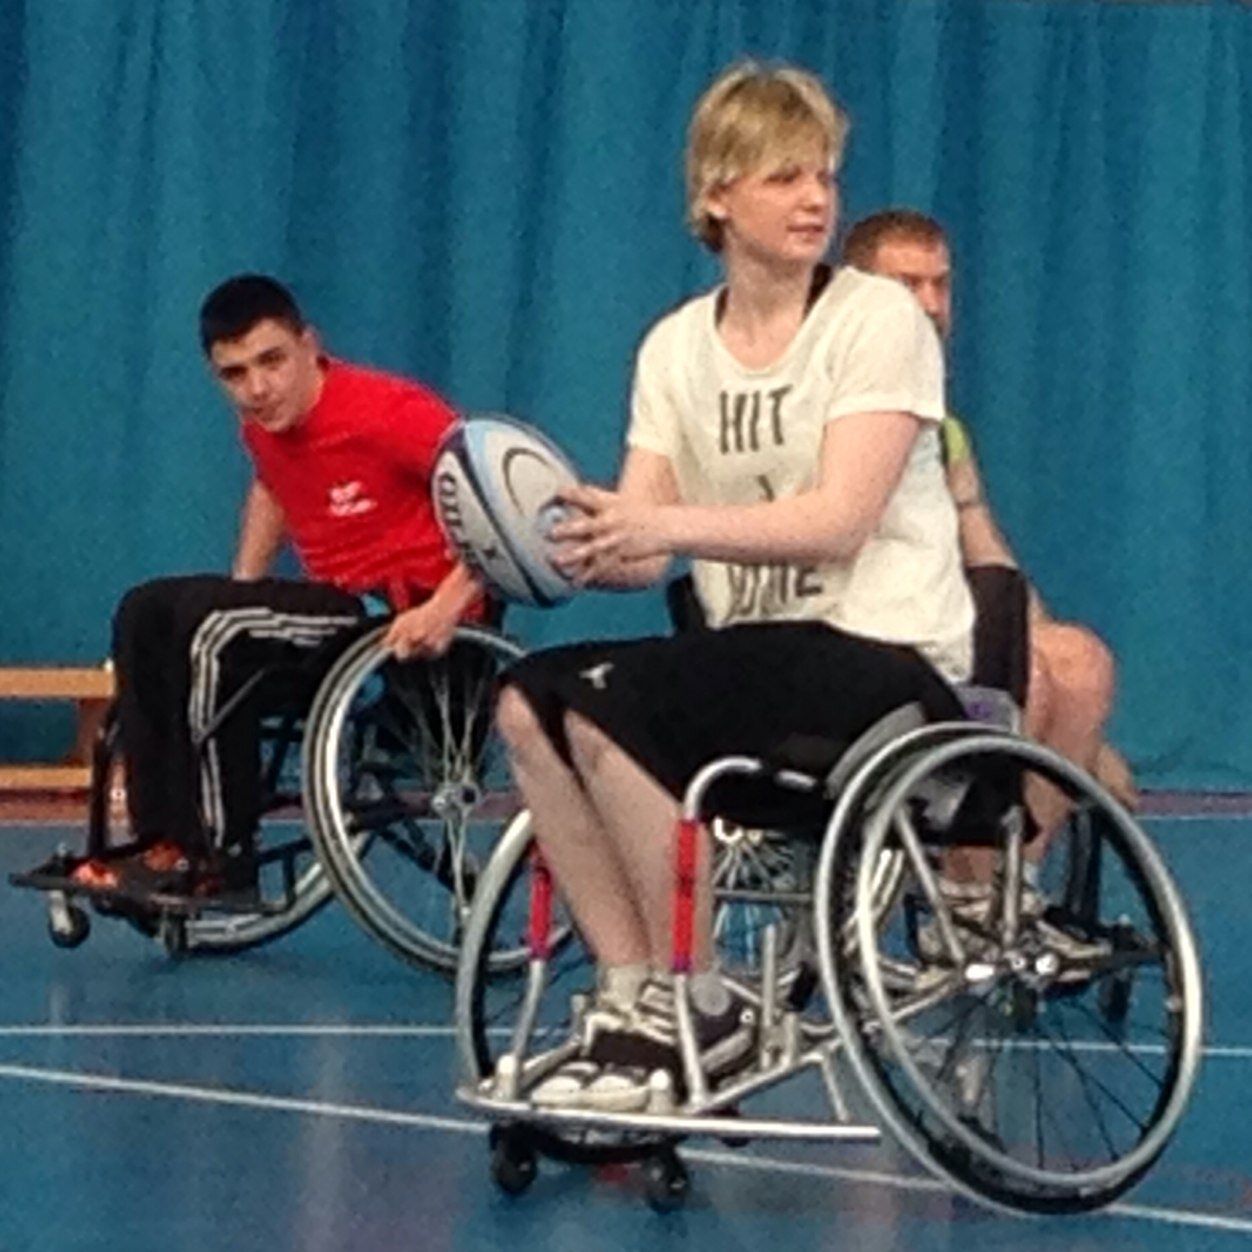 Recreational wheelchair rugby 7's club for disabled and non-disabled adults. This sport uses a regular rugby ball and has versions of scrums and lineouts